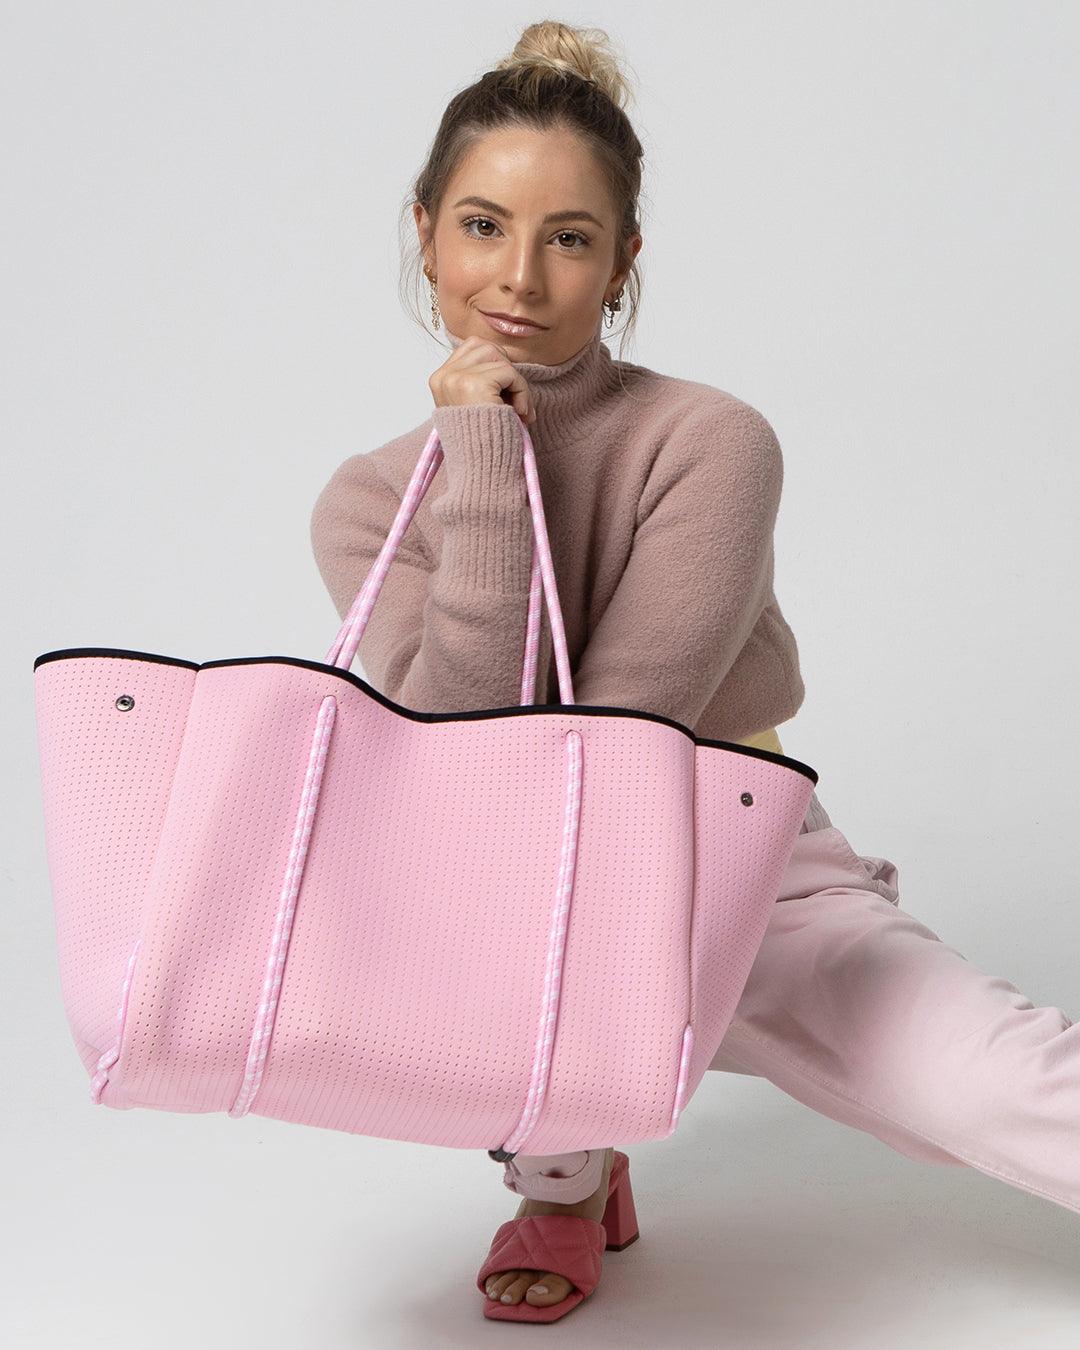 Hot pink bag all October long. The bag for the season! - Pop Ups Brand